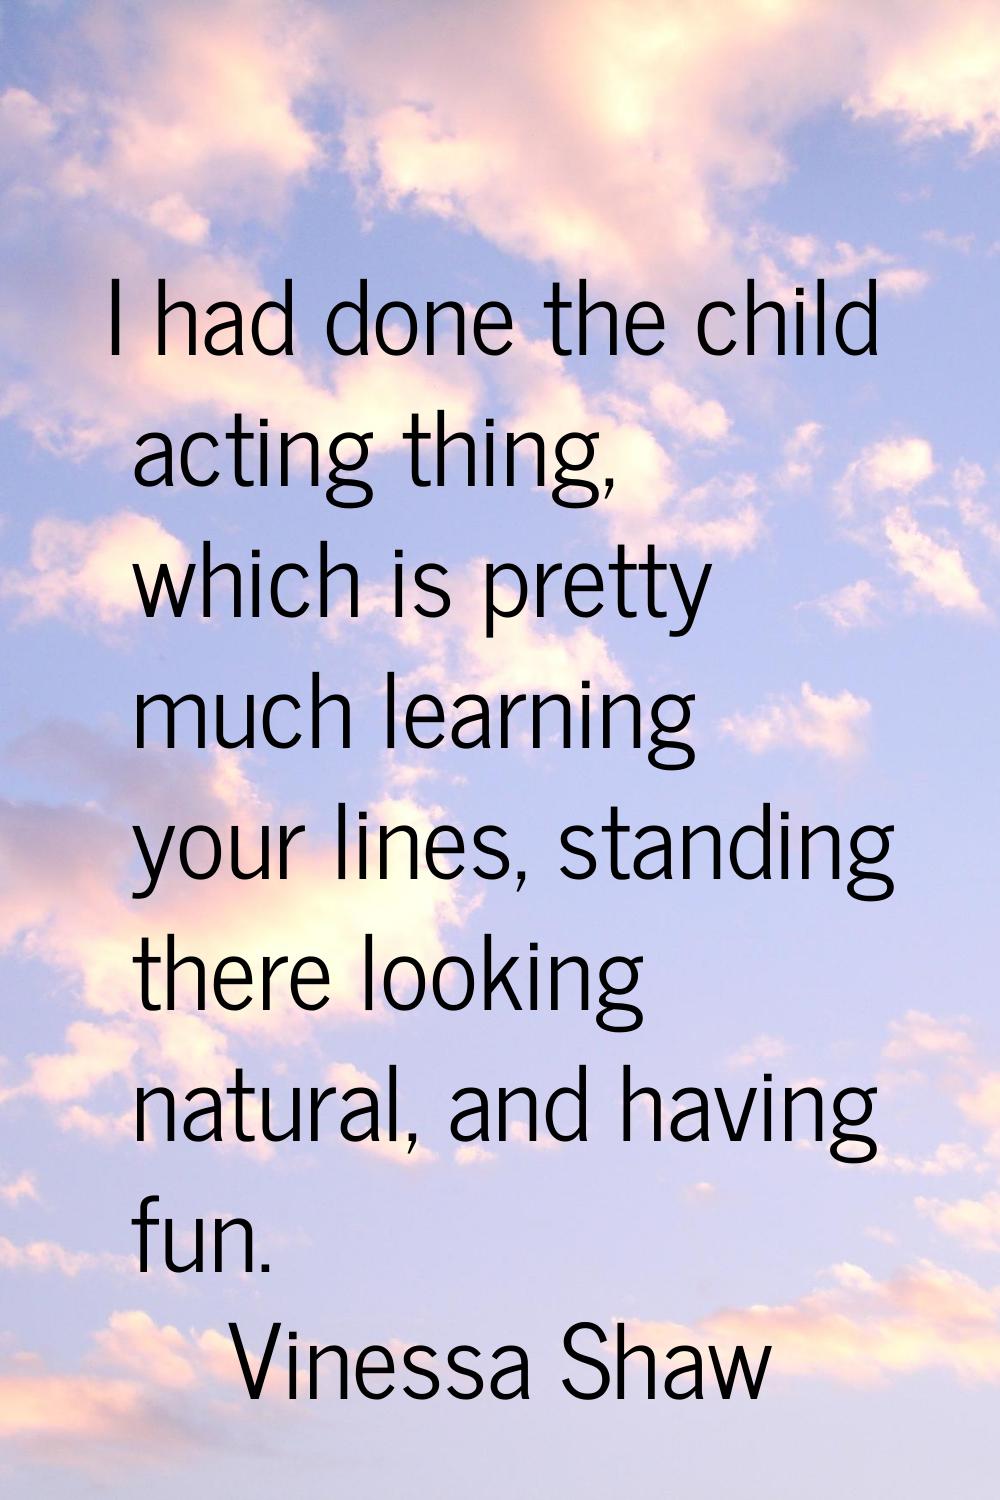 I had done the child acting thing, which is pretty much learning your lines, standing there looking